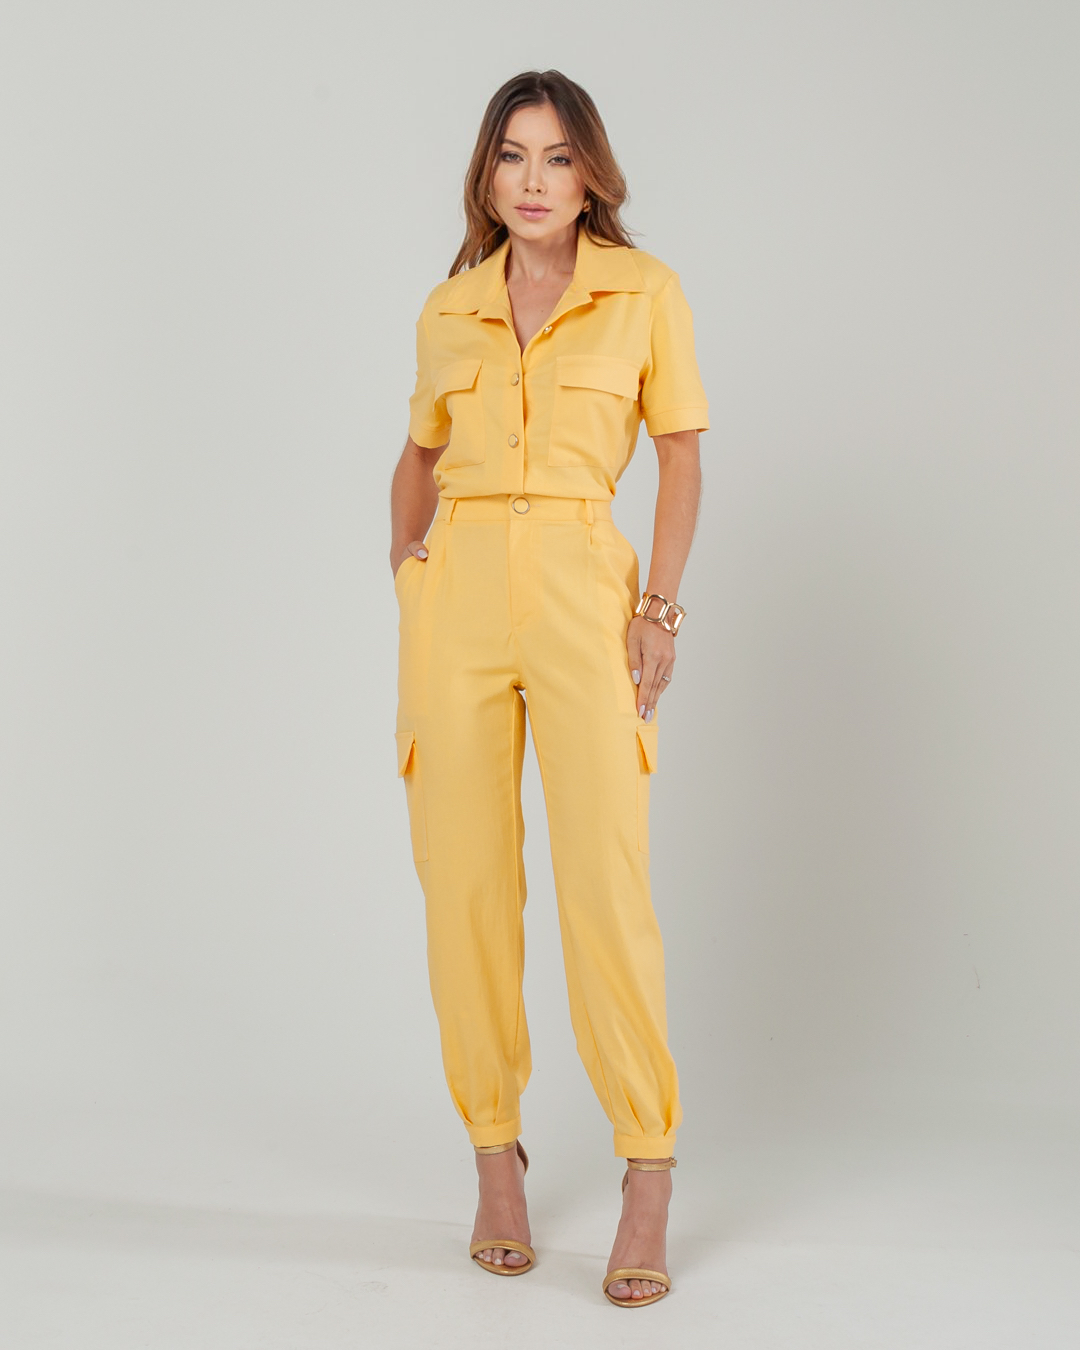 Miss Misses - Miss Misses Pants With Side Pockets Yellow - 54080003